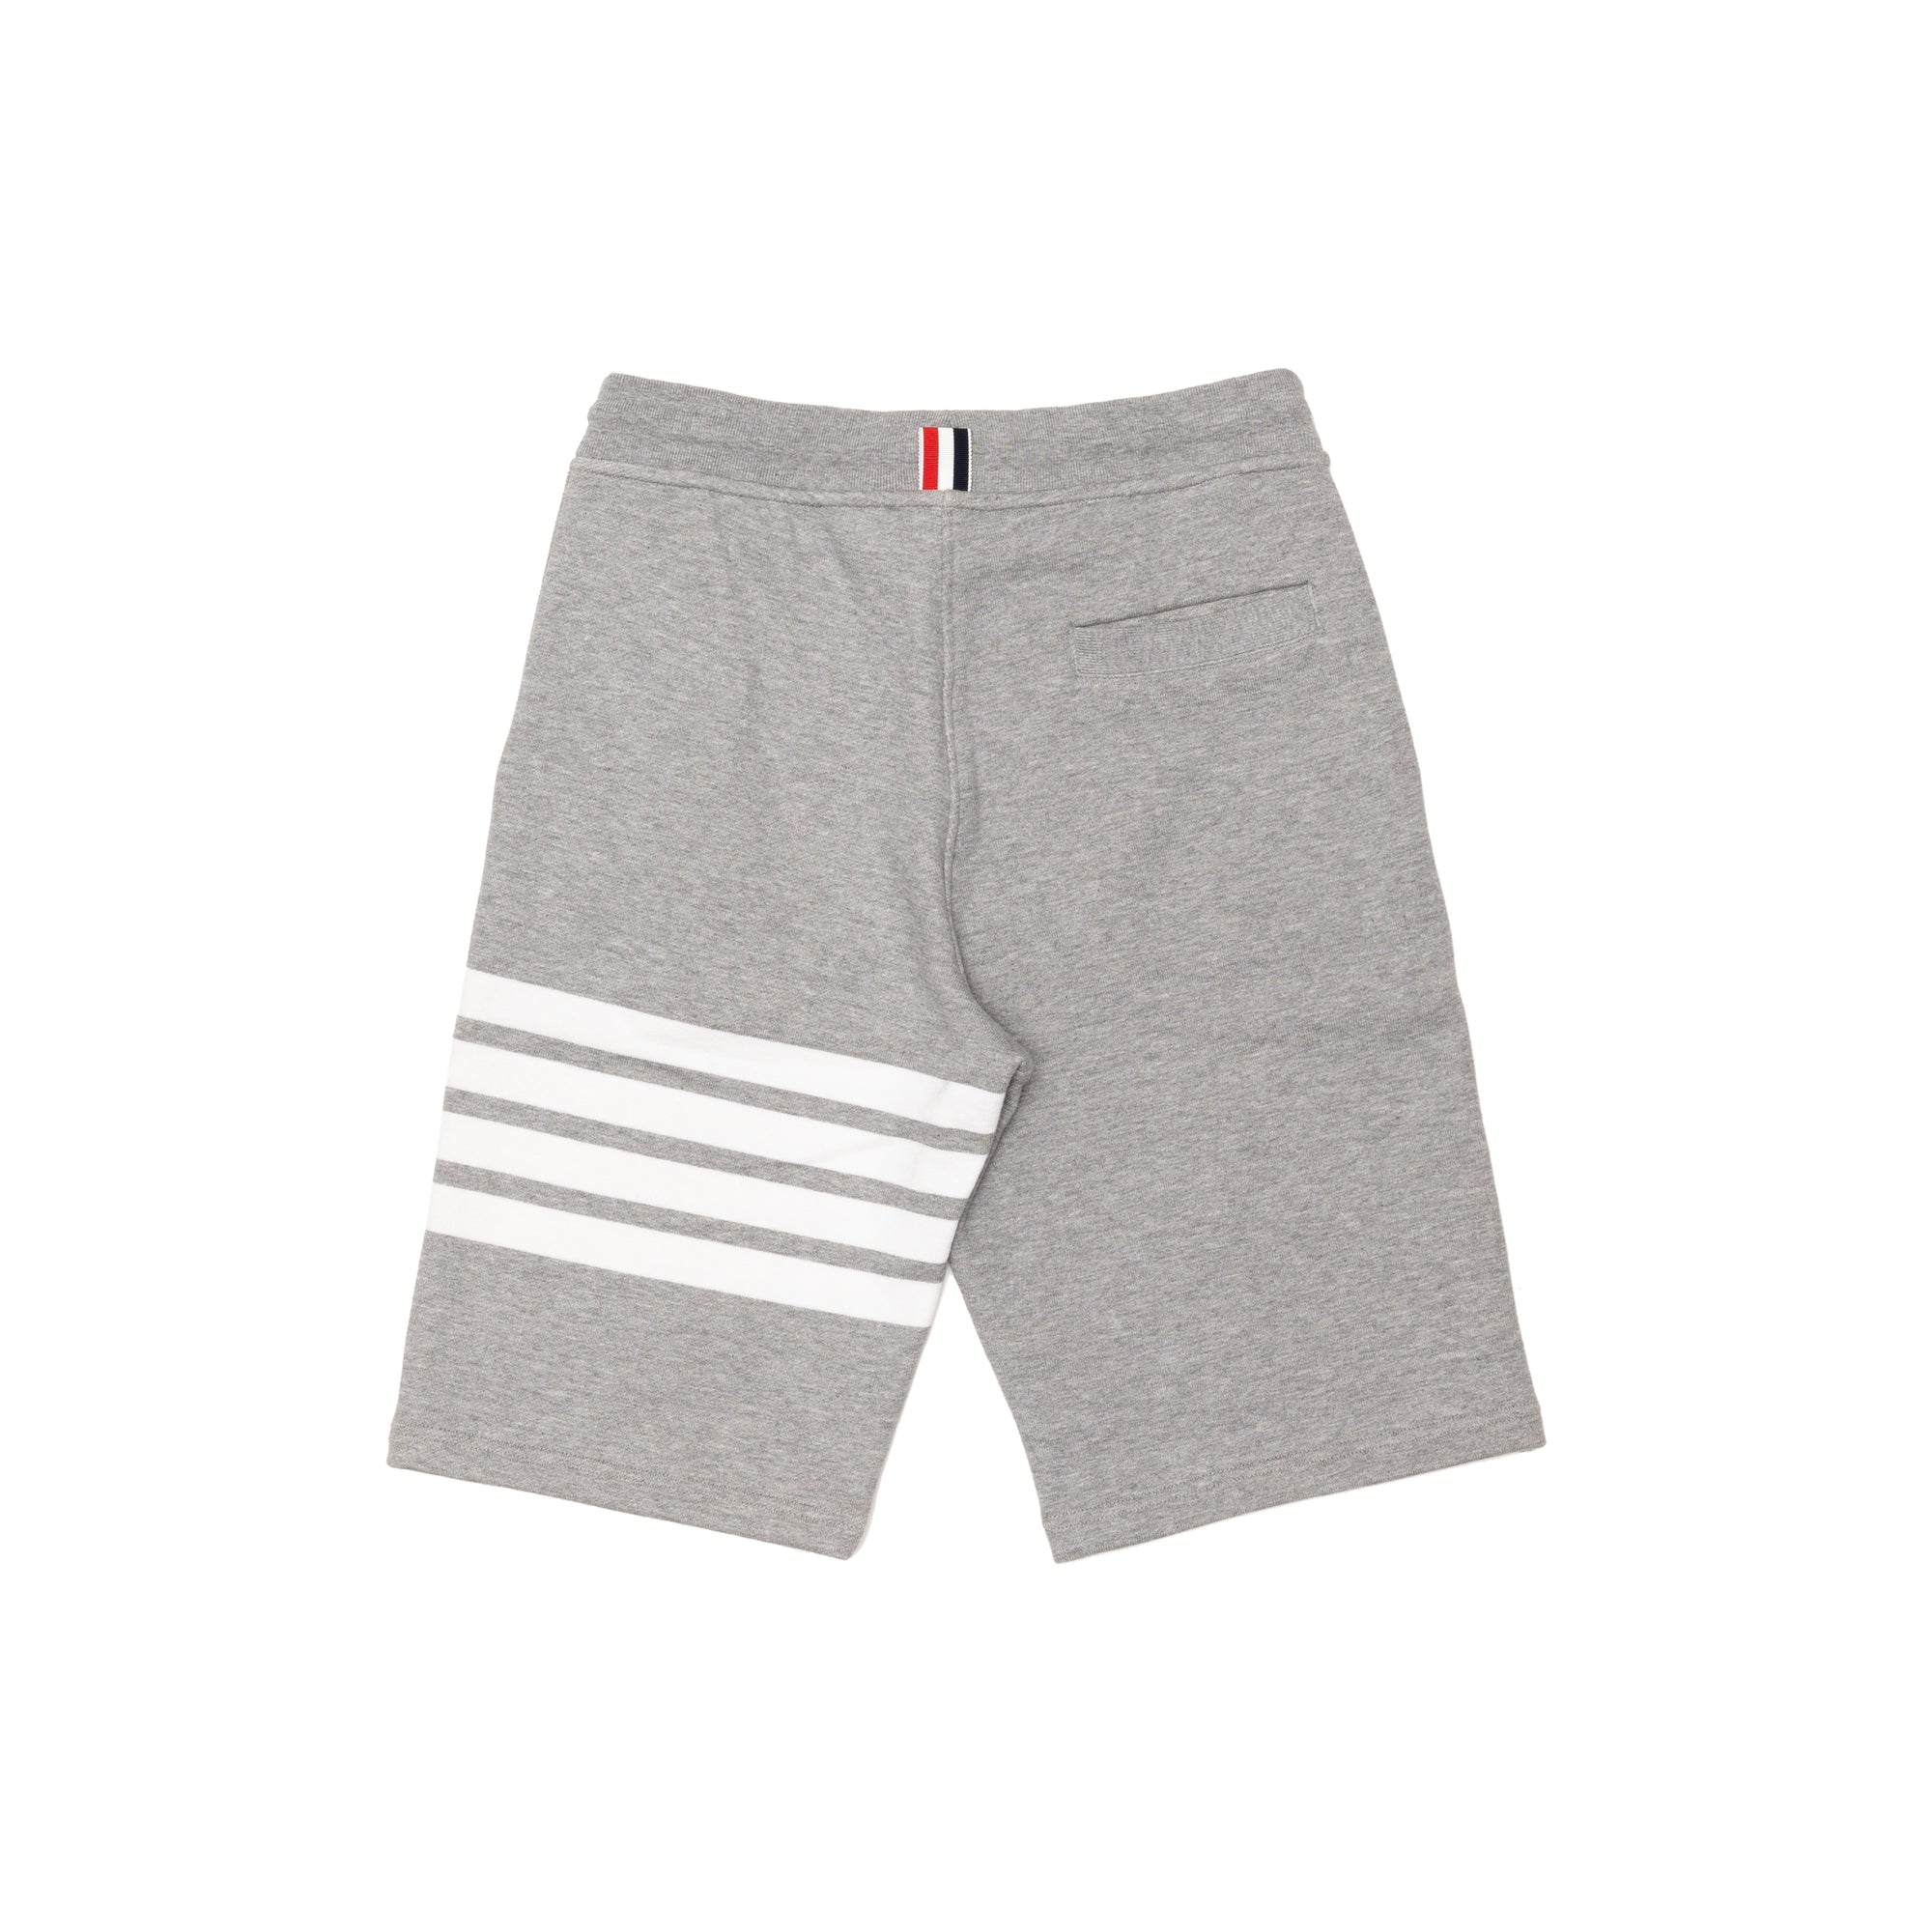 THOM BROWNE - MENS CLASSIC SWEAT SHORTS WITH ENGI - GREY - (MJQ012H-00535) view 2